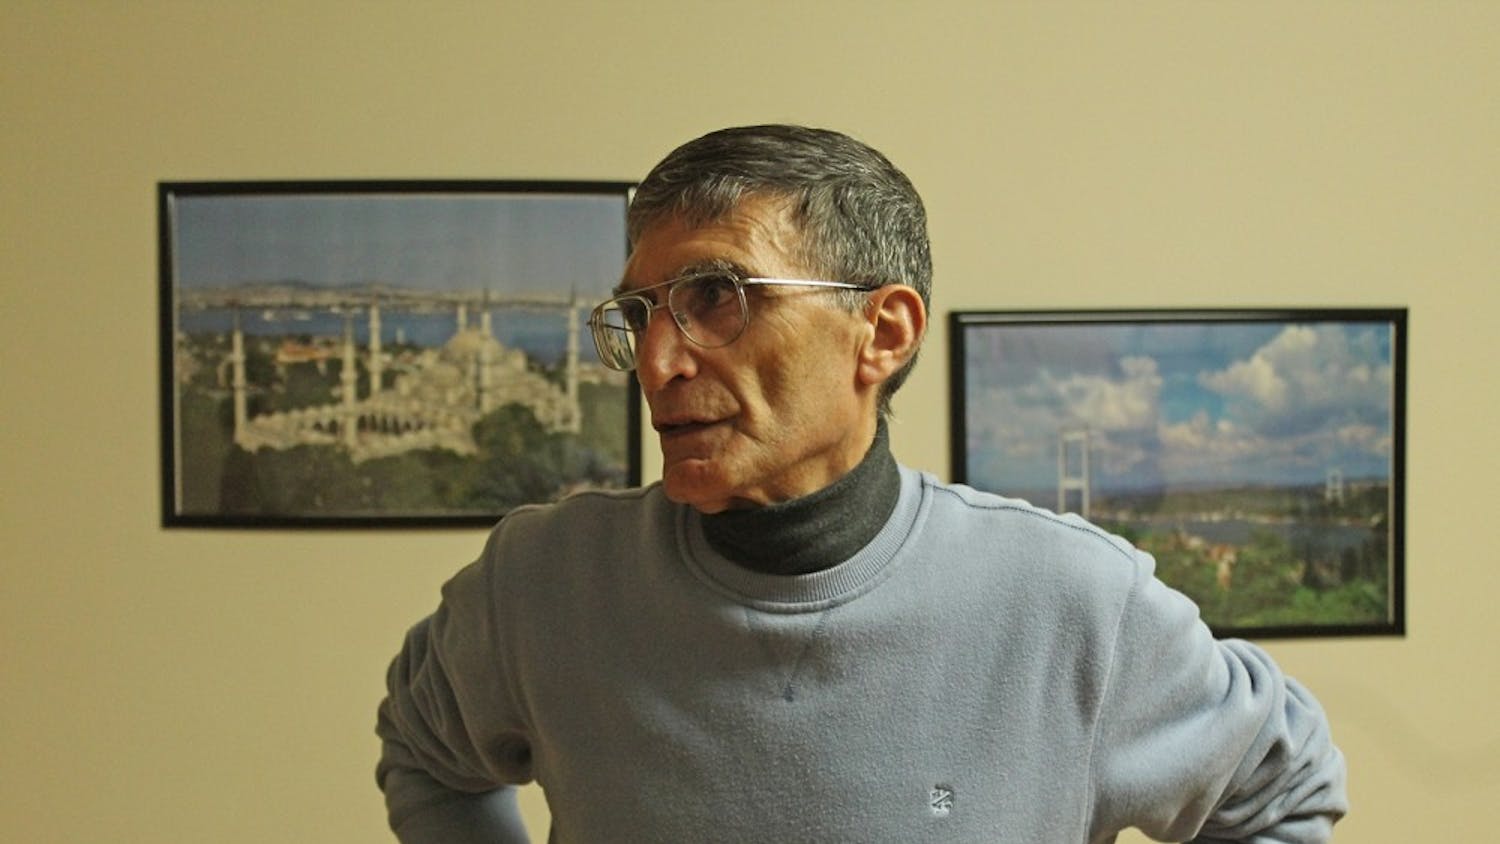 Aziz Sancar stands in the home he owns and runs for students from Turkey to adjust to life at UNC on Wednesday Oct. 28